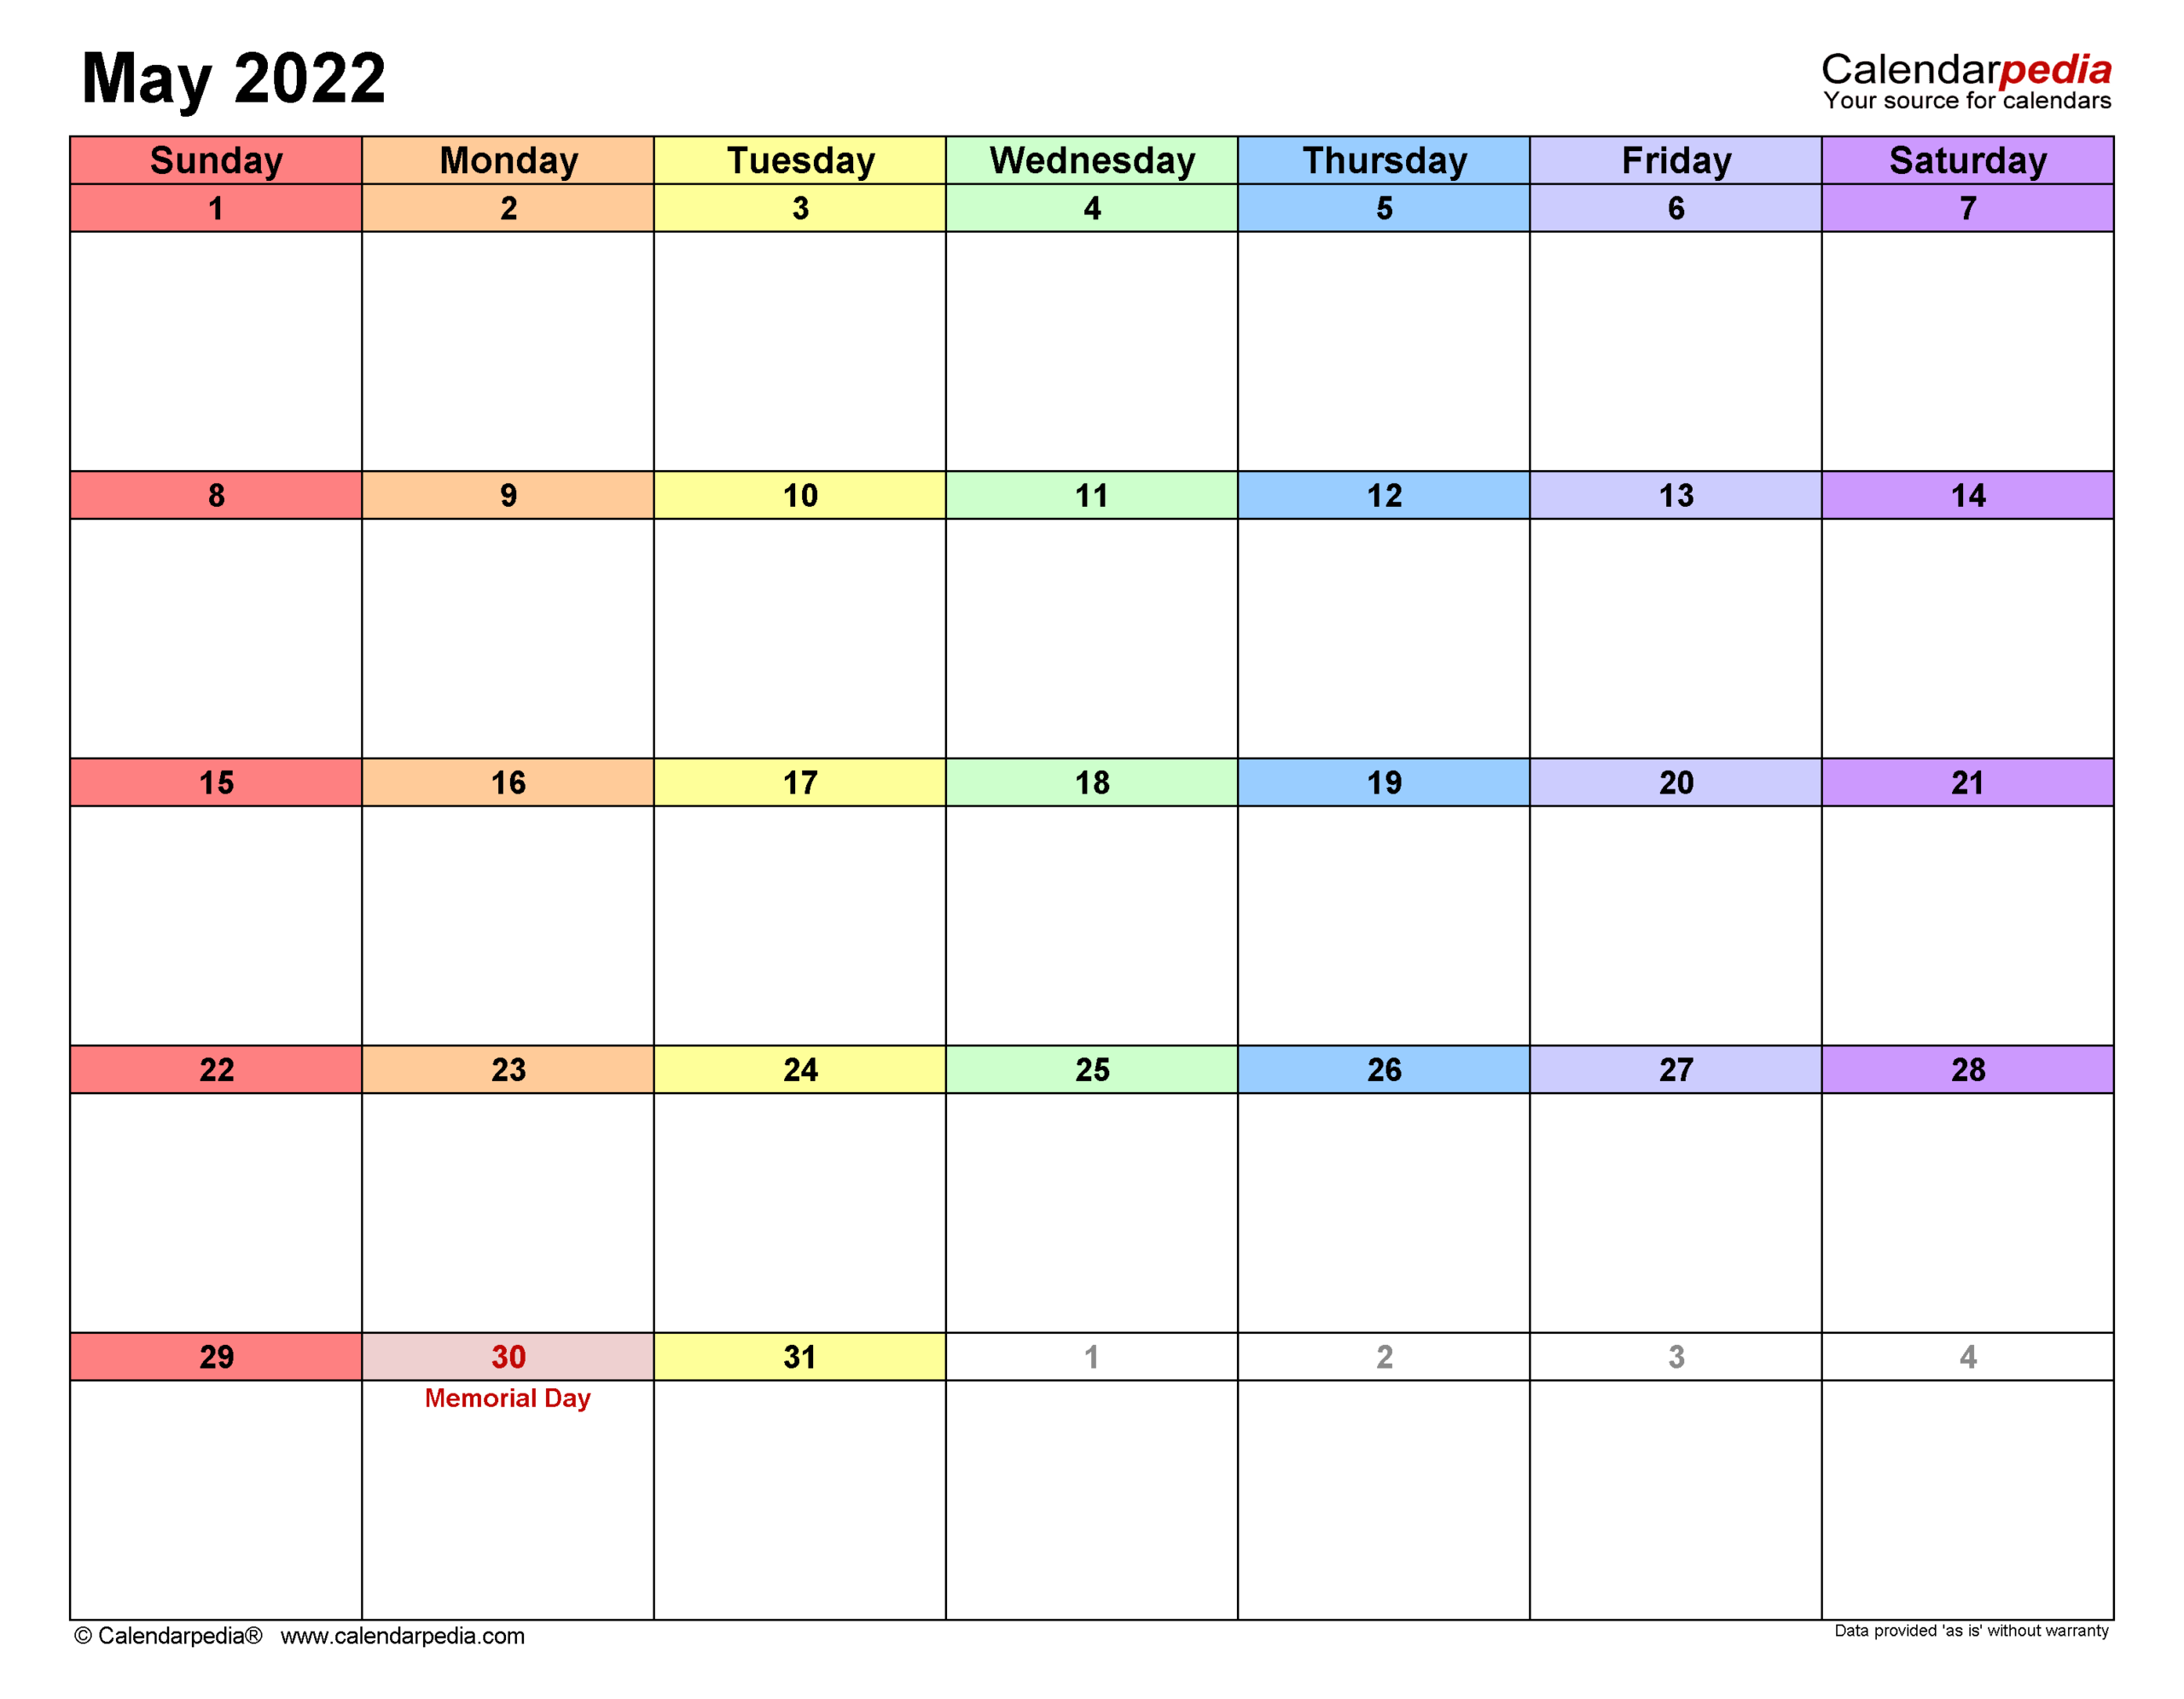 May 2022 Calendar | Templates For Word, Excel And Pdf  Calendar For May Of 2022